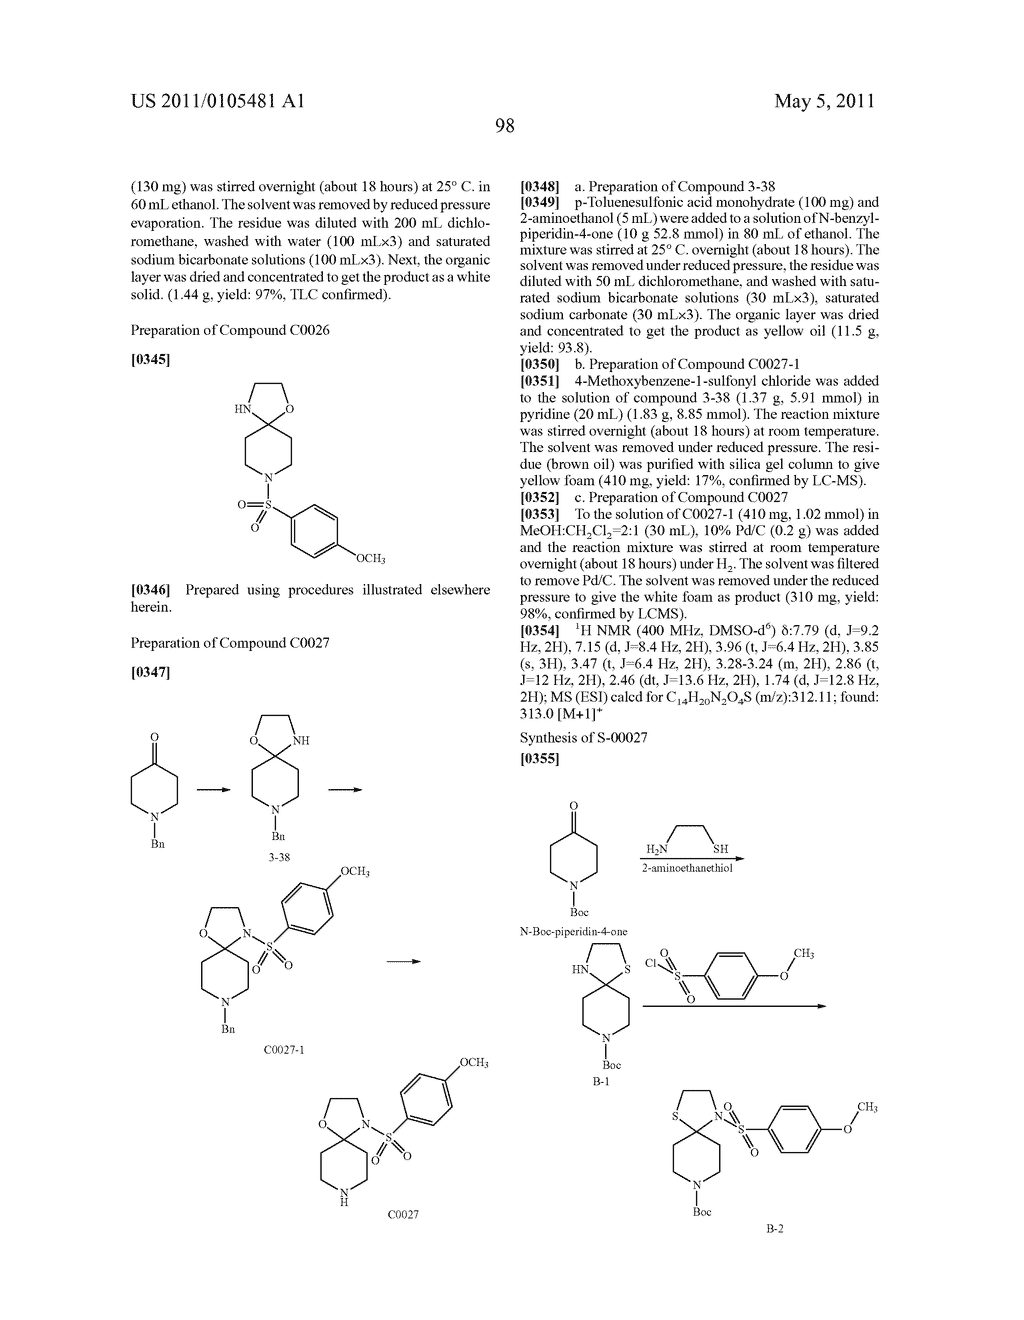 FILAMIN A BINDING ANTI-INFLAMMATORY AND ANALGESIC - diagram, schematic, and image 99